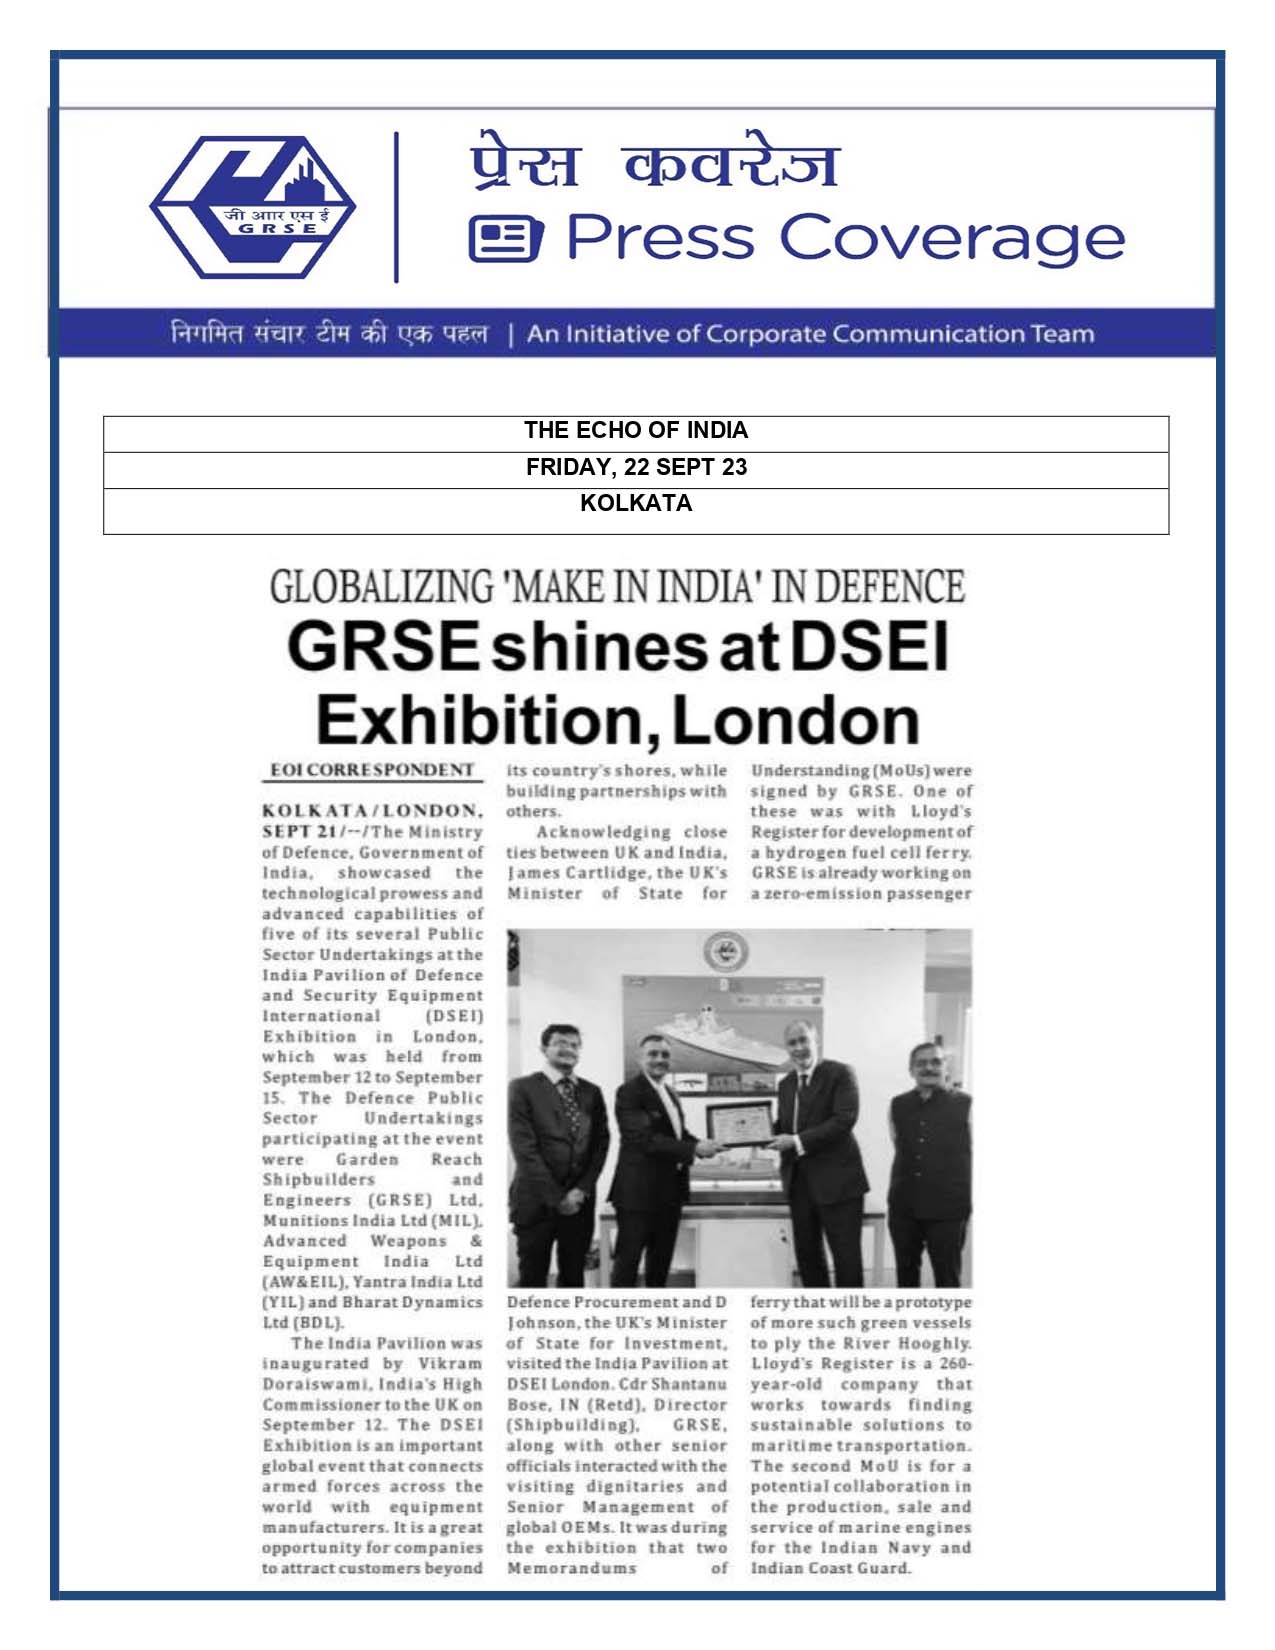 Press Coverage : The Echo of India, 21 Sep 23 : Globalizing Make in India in Defence, GRSE shines at DSEI Exhibition, London